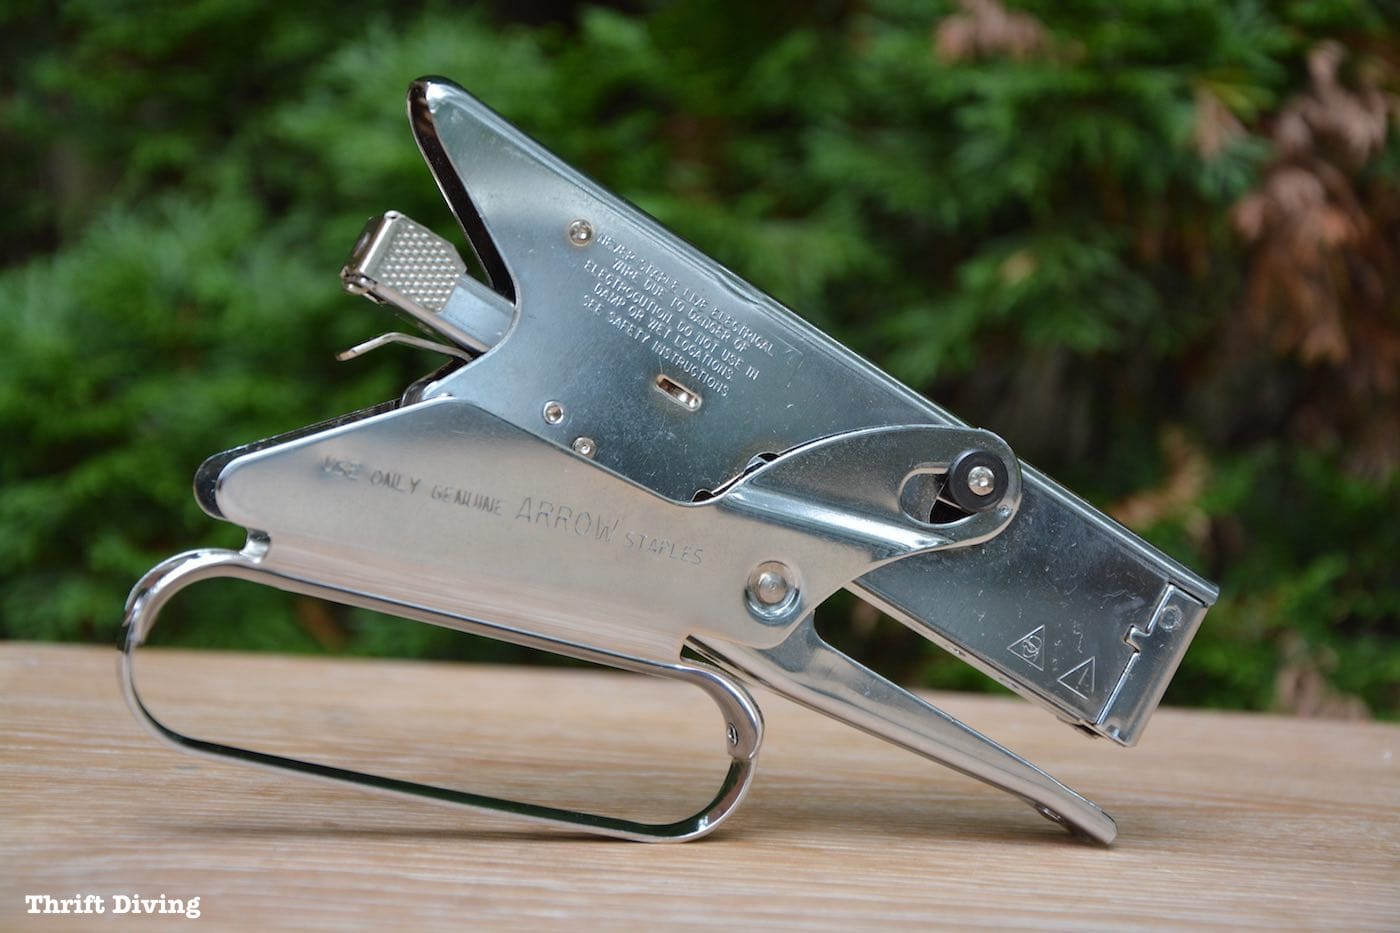 Arrow Fastener Plier Stapler - Great for stapling up to 40 sheets of paper at a time, or holding fabric together while sewing. - Thrift Diving